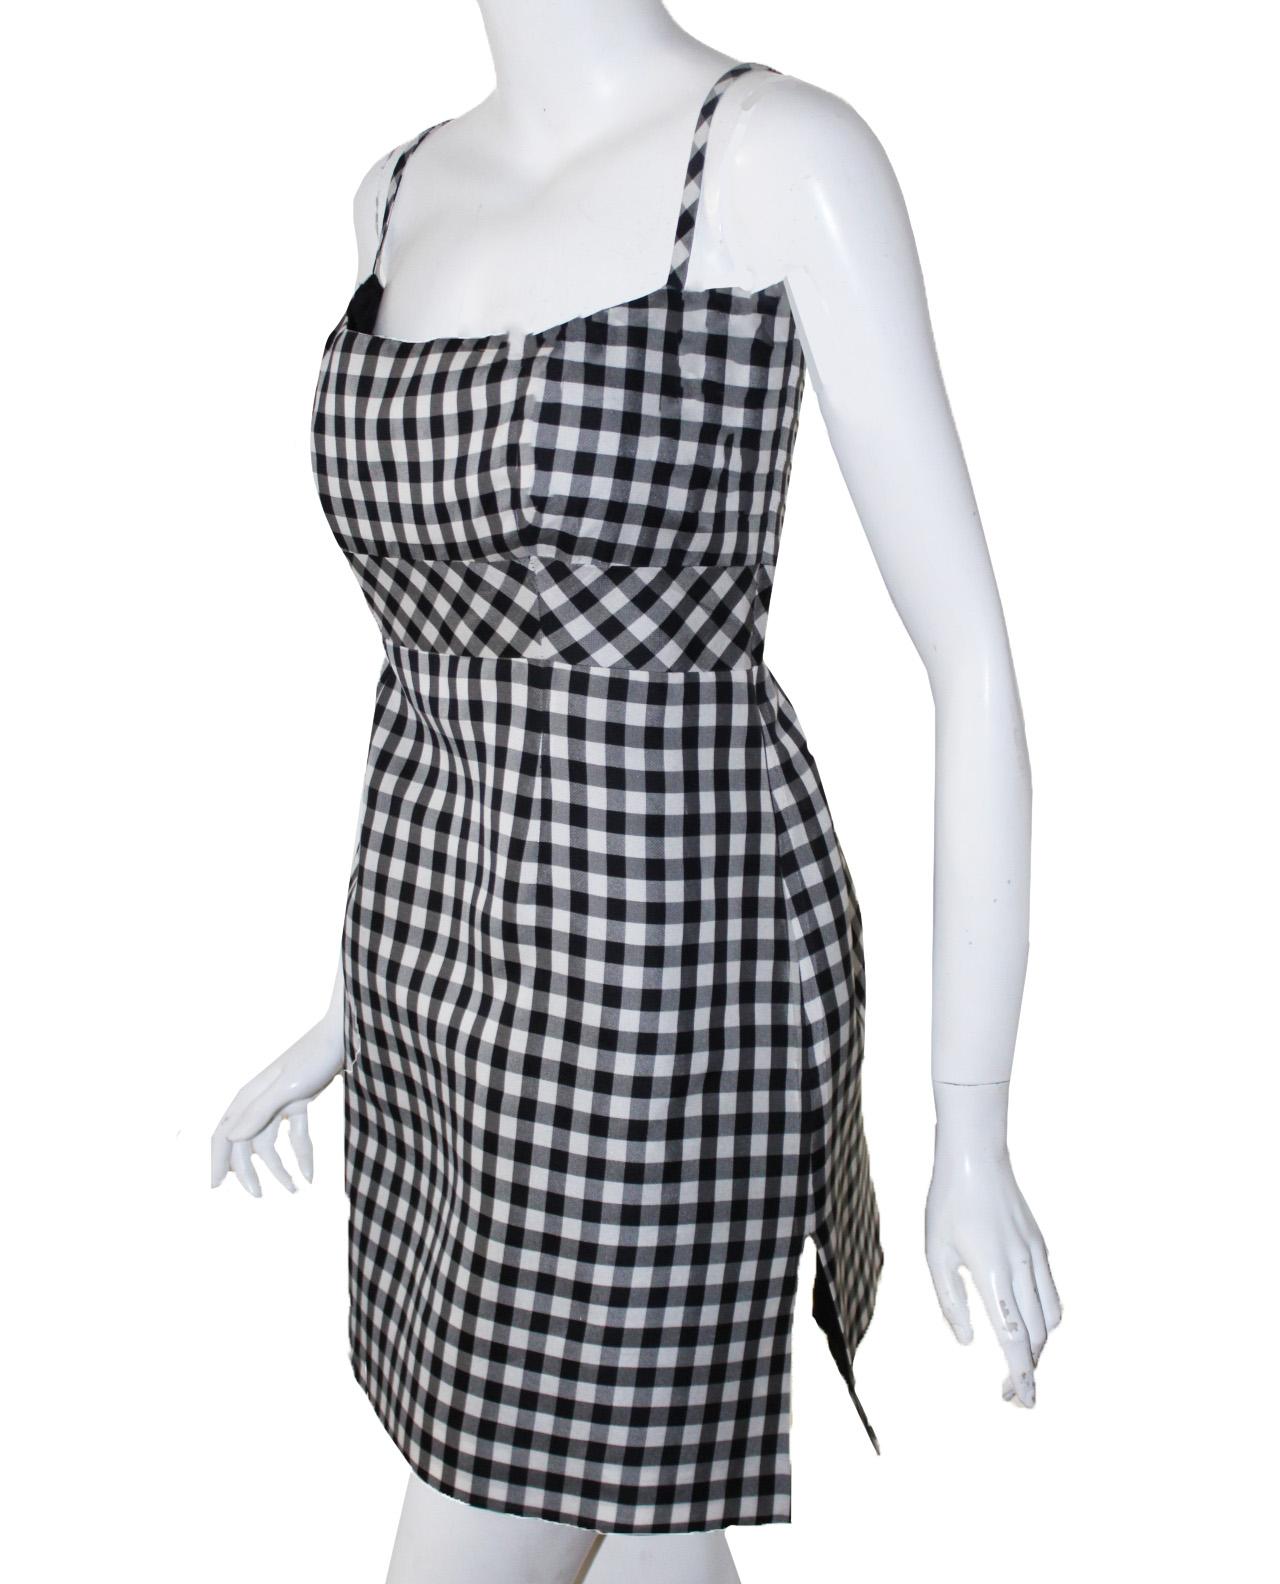 Chanel black and white gingham check summer silk dress includes spaghetti straps and a zipper at the side for closure.   This dress contains a vent at one side and is fully lined in black silk organza.  This dress was professionally altered, so